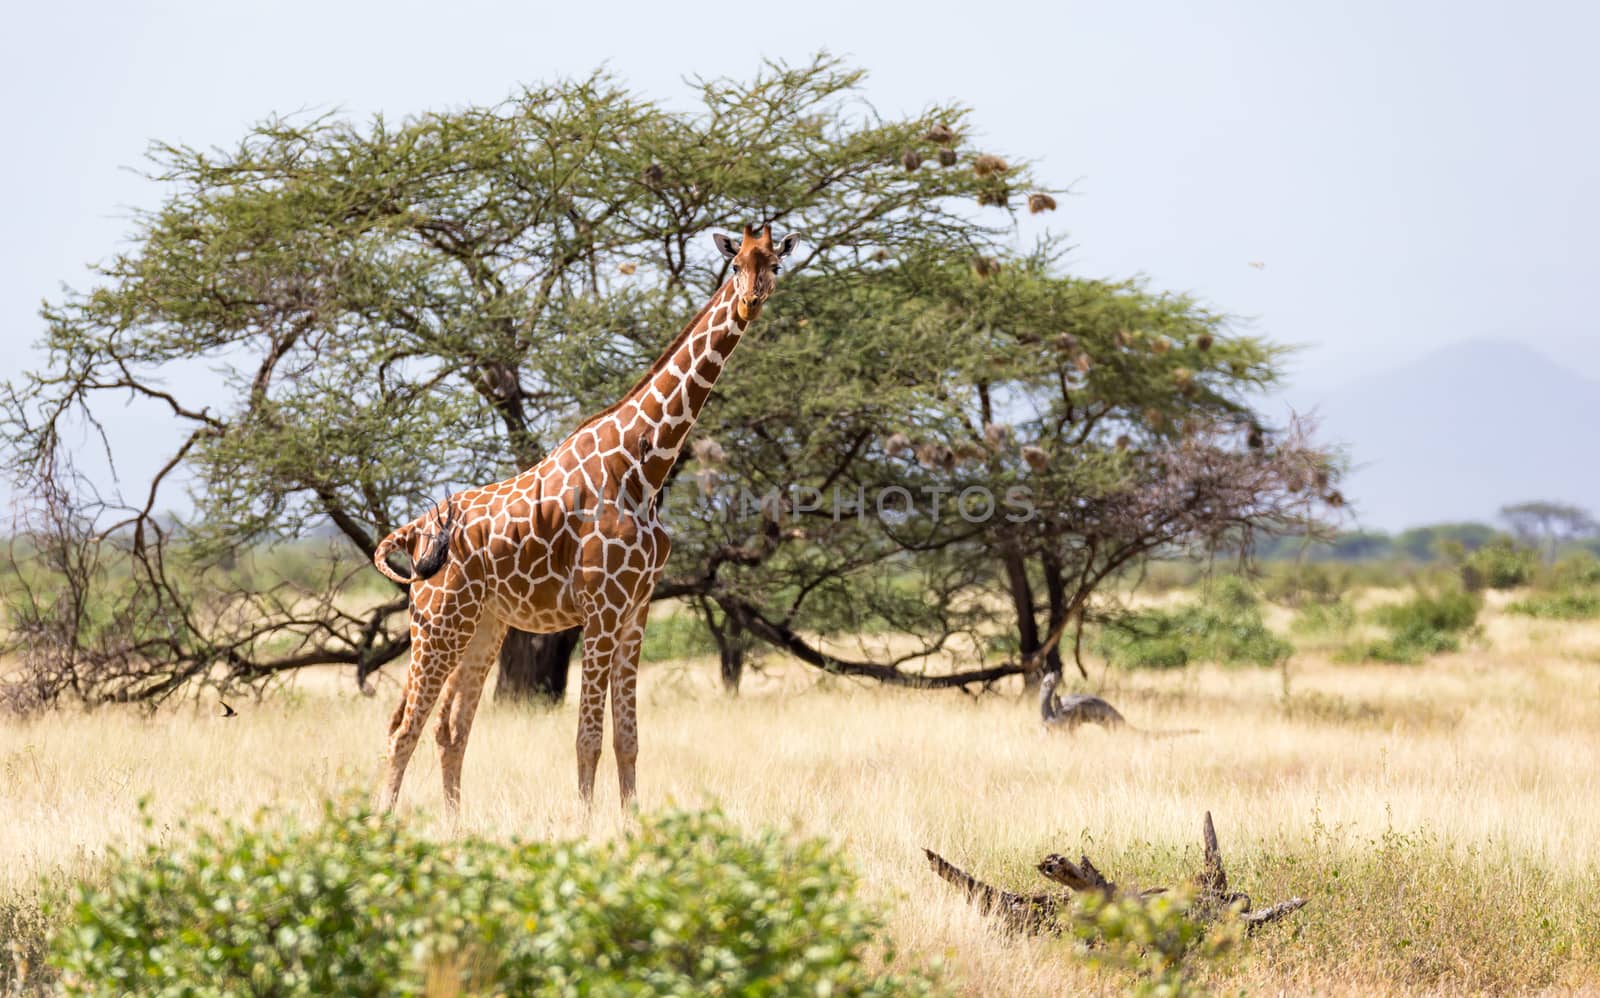 Giraffes in the savannah with many trees and bushes in the background